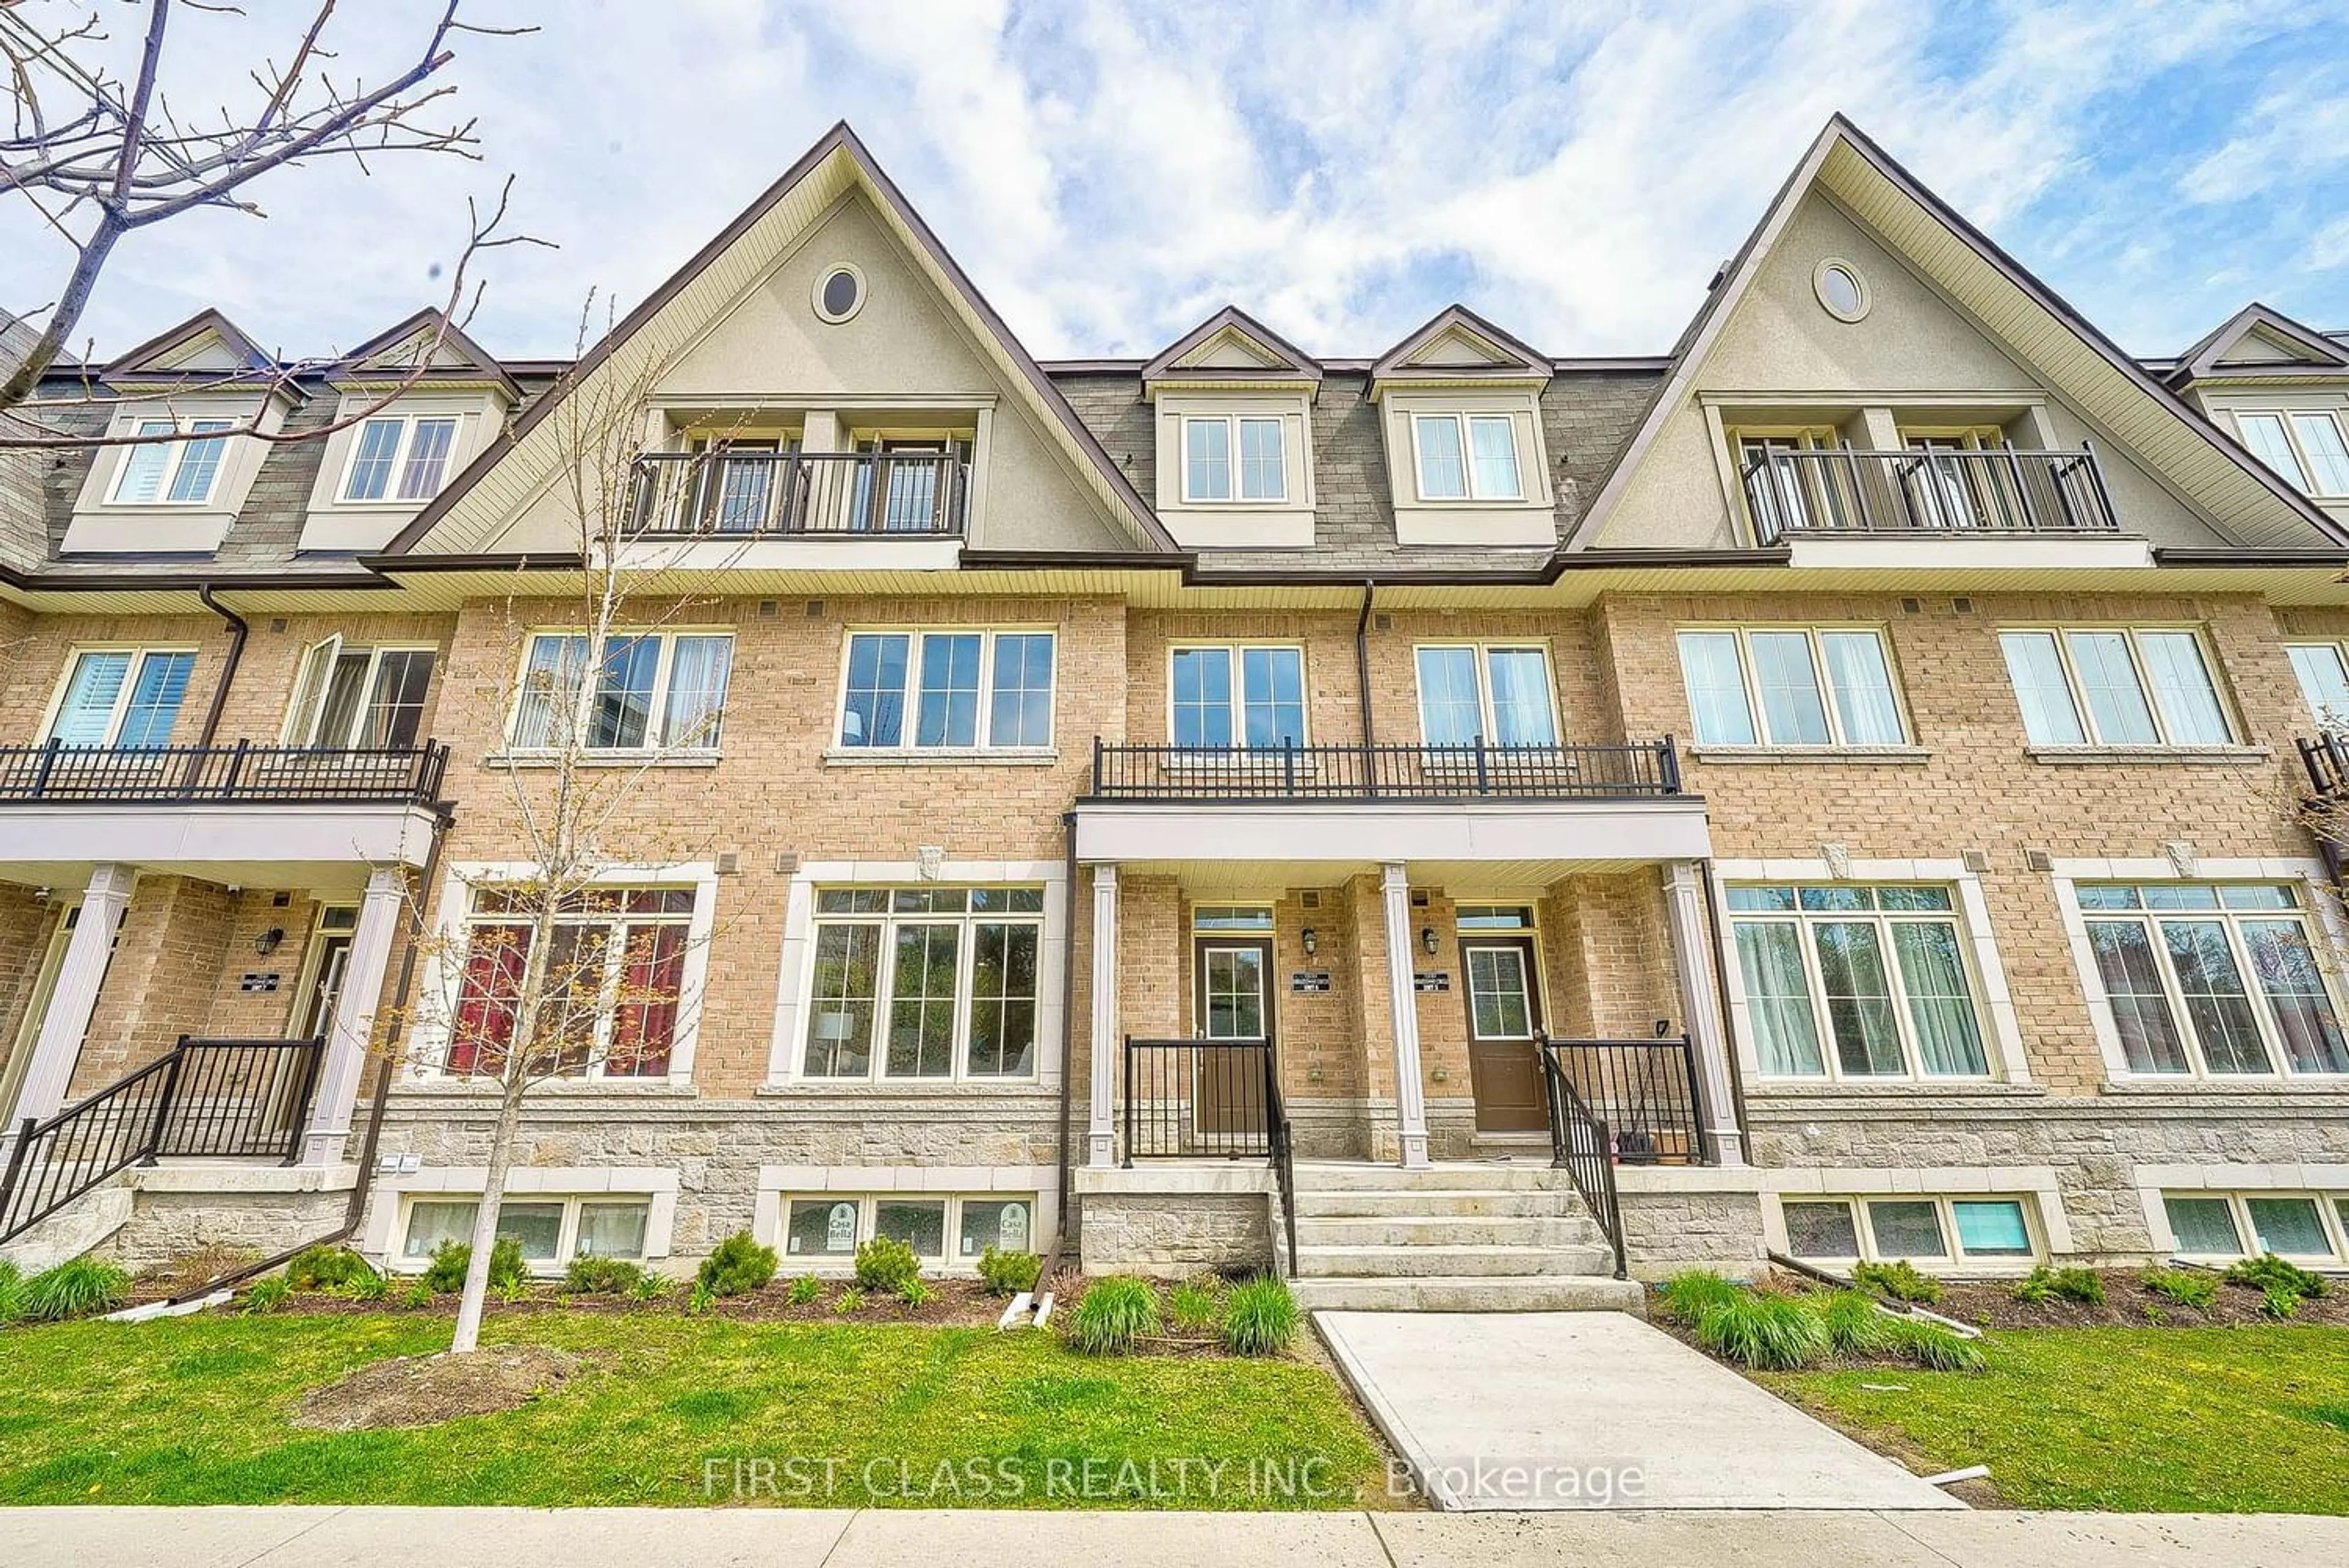 Home with brick exterior material for 1251 Bridletowne Circ #6, Toronto Ontario M1W 1S7